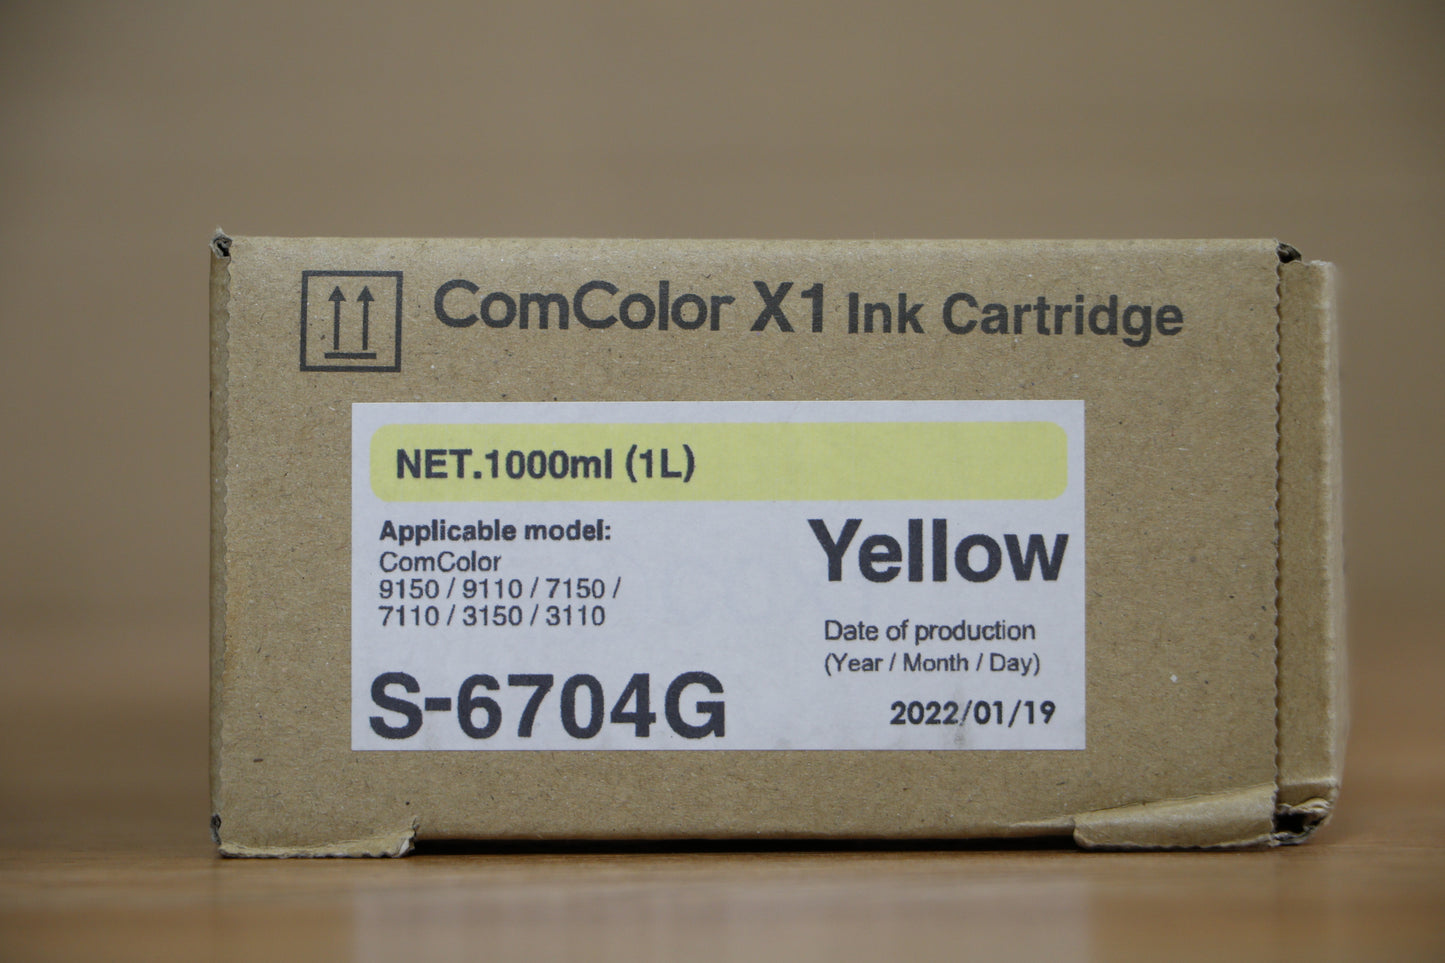 Genuine S-6704G Yellow Ink Cartridge Riso ComColor 3110 3150 7110 7150 7510 9110